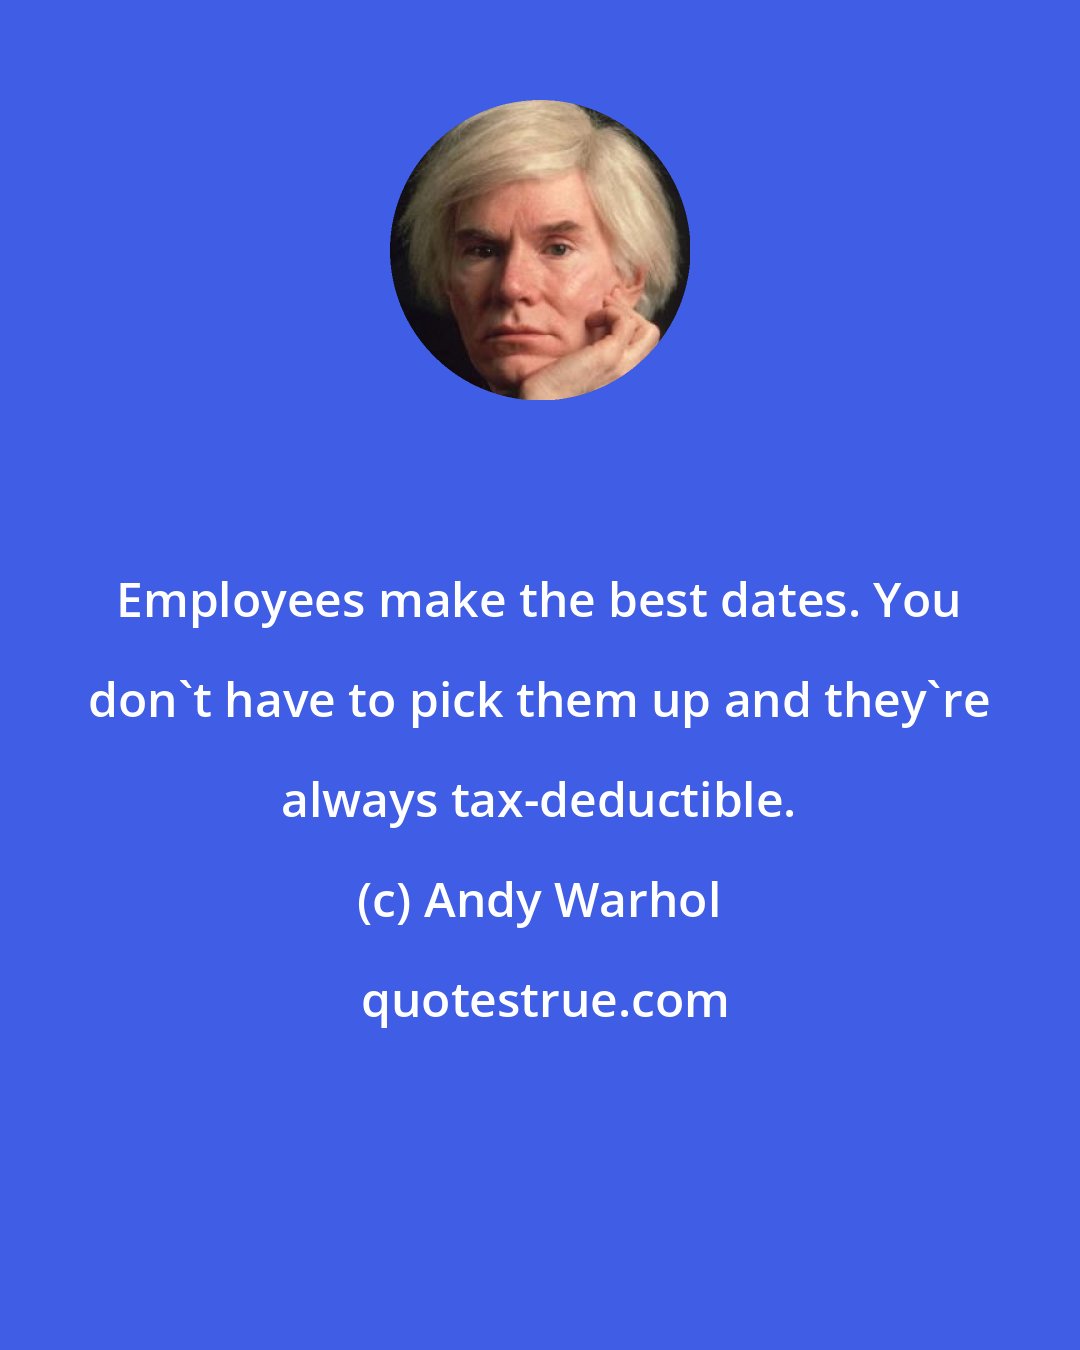 Andy Warhol: Employees make the best dates. You don't have to pick them up and they're always tax-deductible.